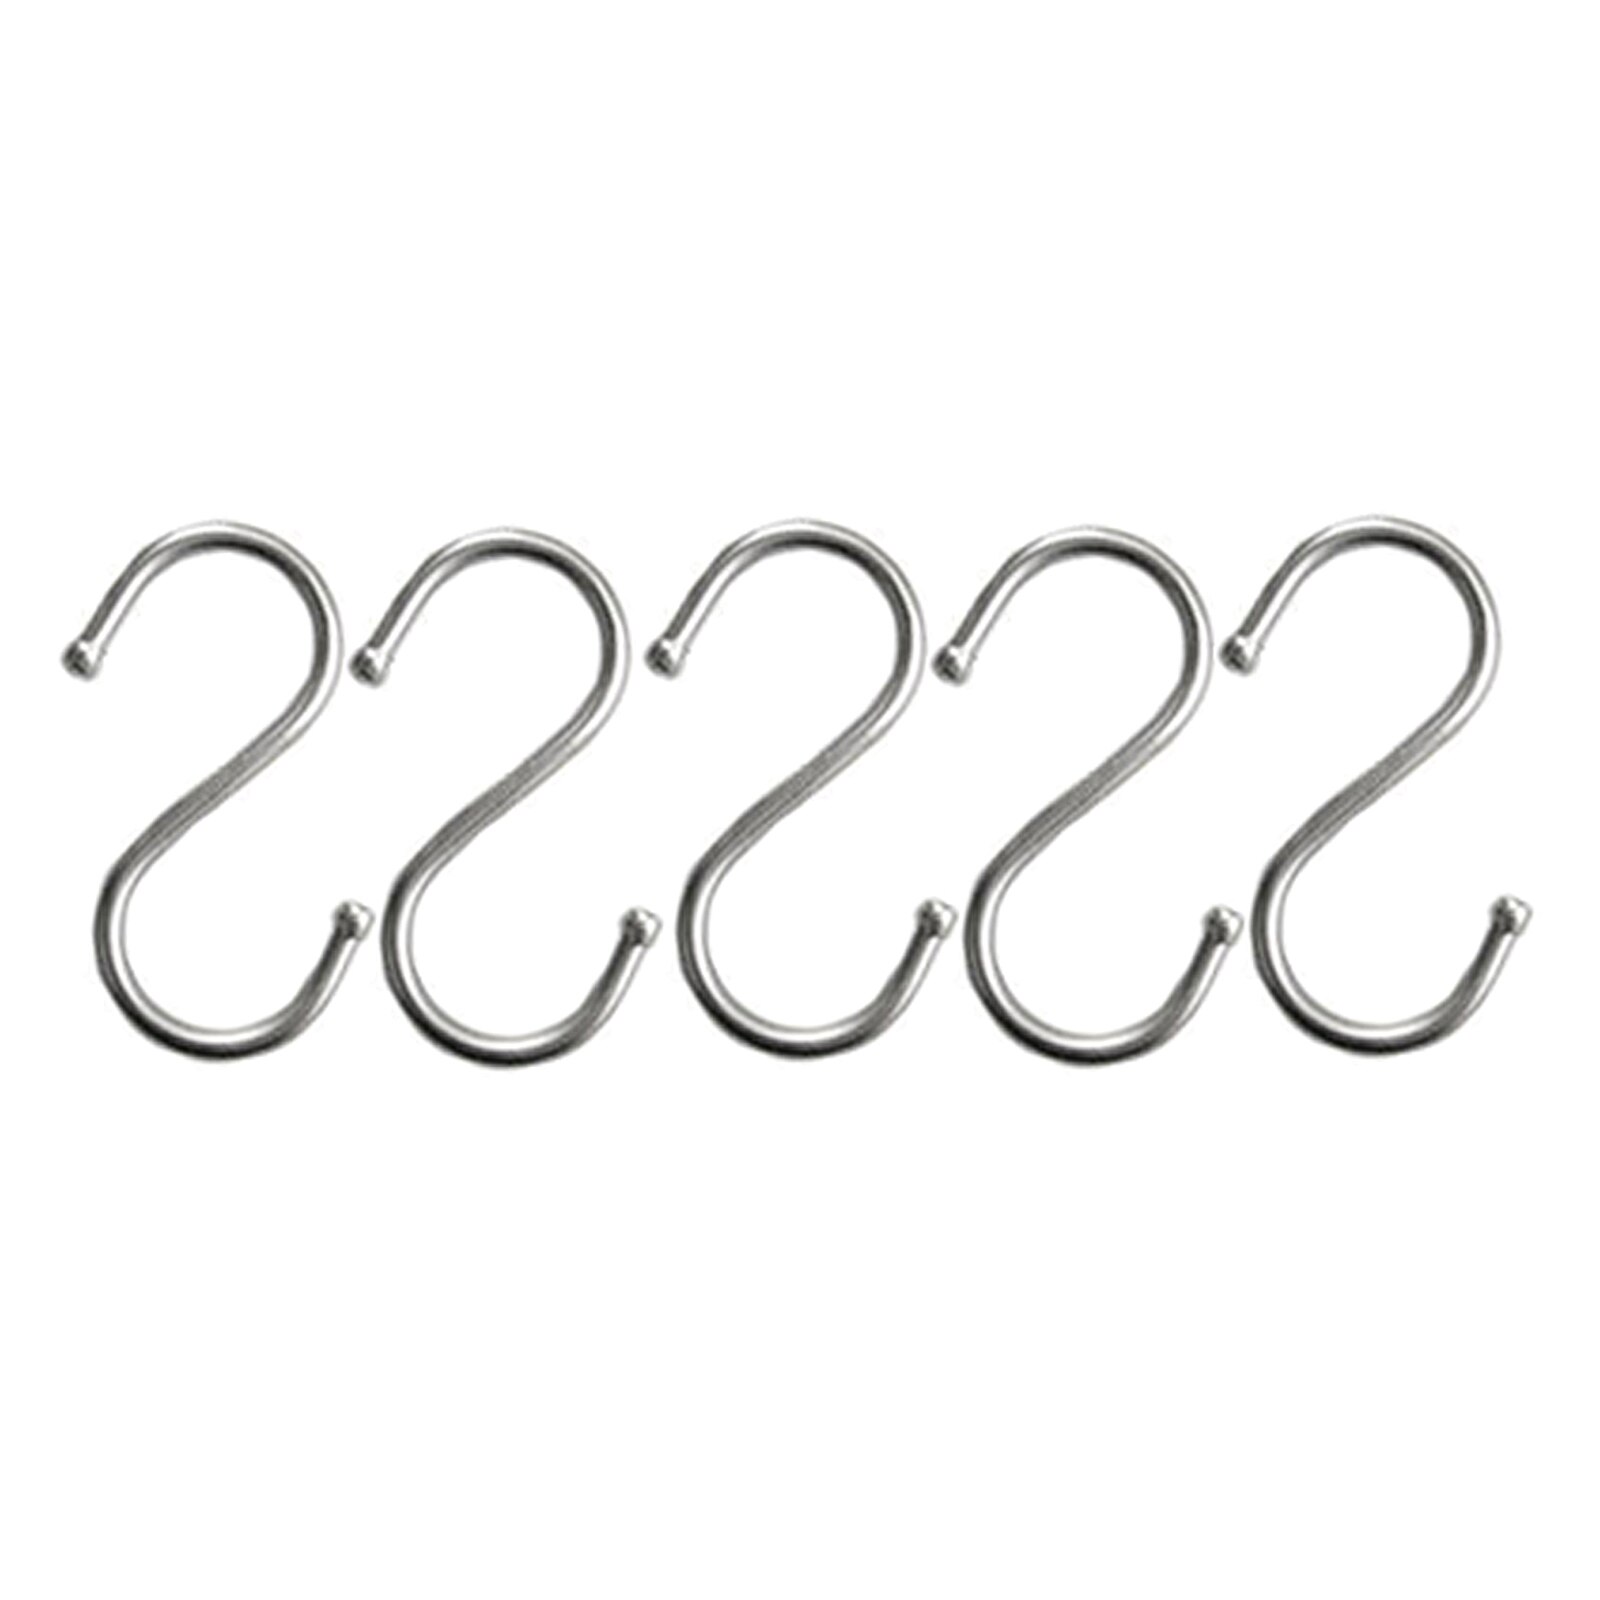 5pcs tainless Steel S Hooks, Drill-free Kithcen Rod Pan Pot Hanging Hook, Clothes Hanger Hook for Jeans Pants Scarfs Bags